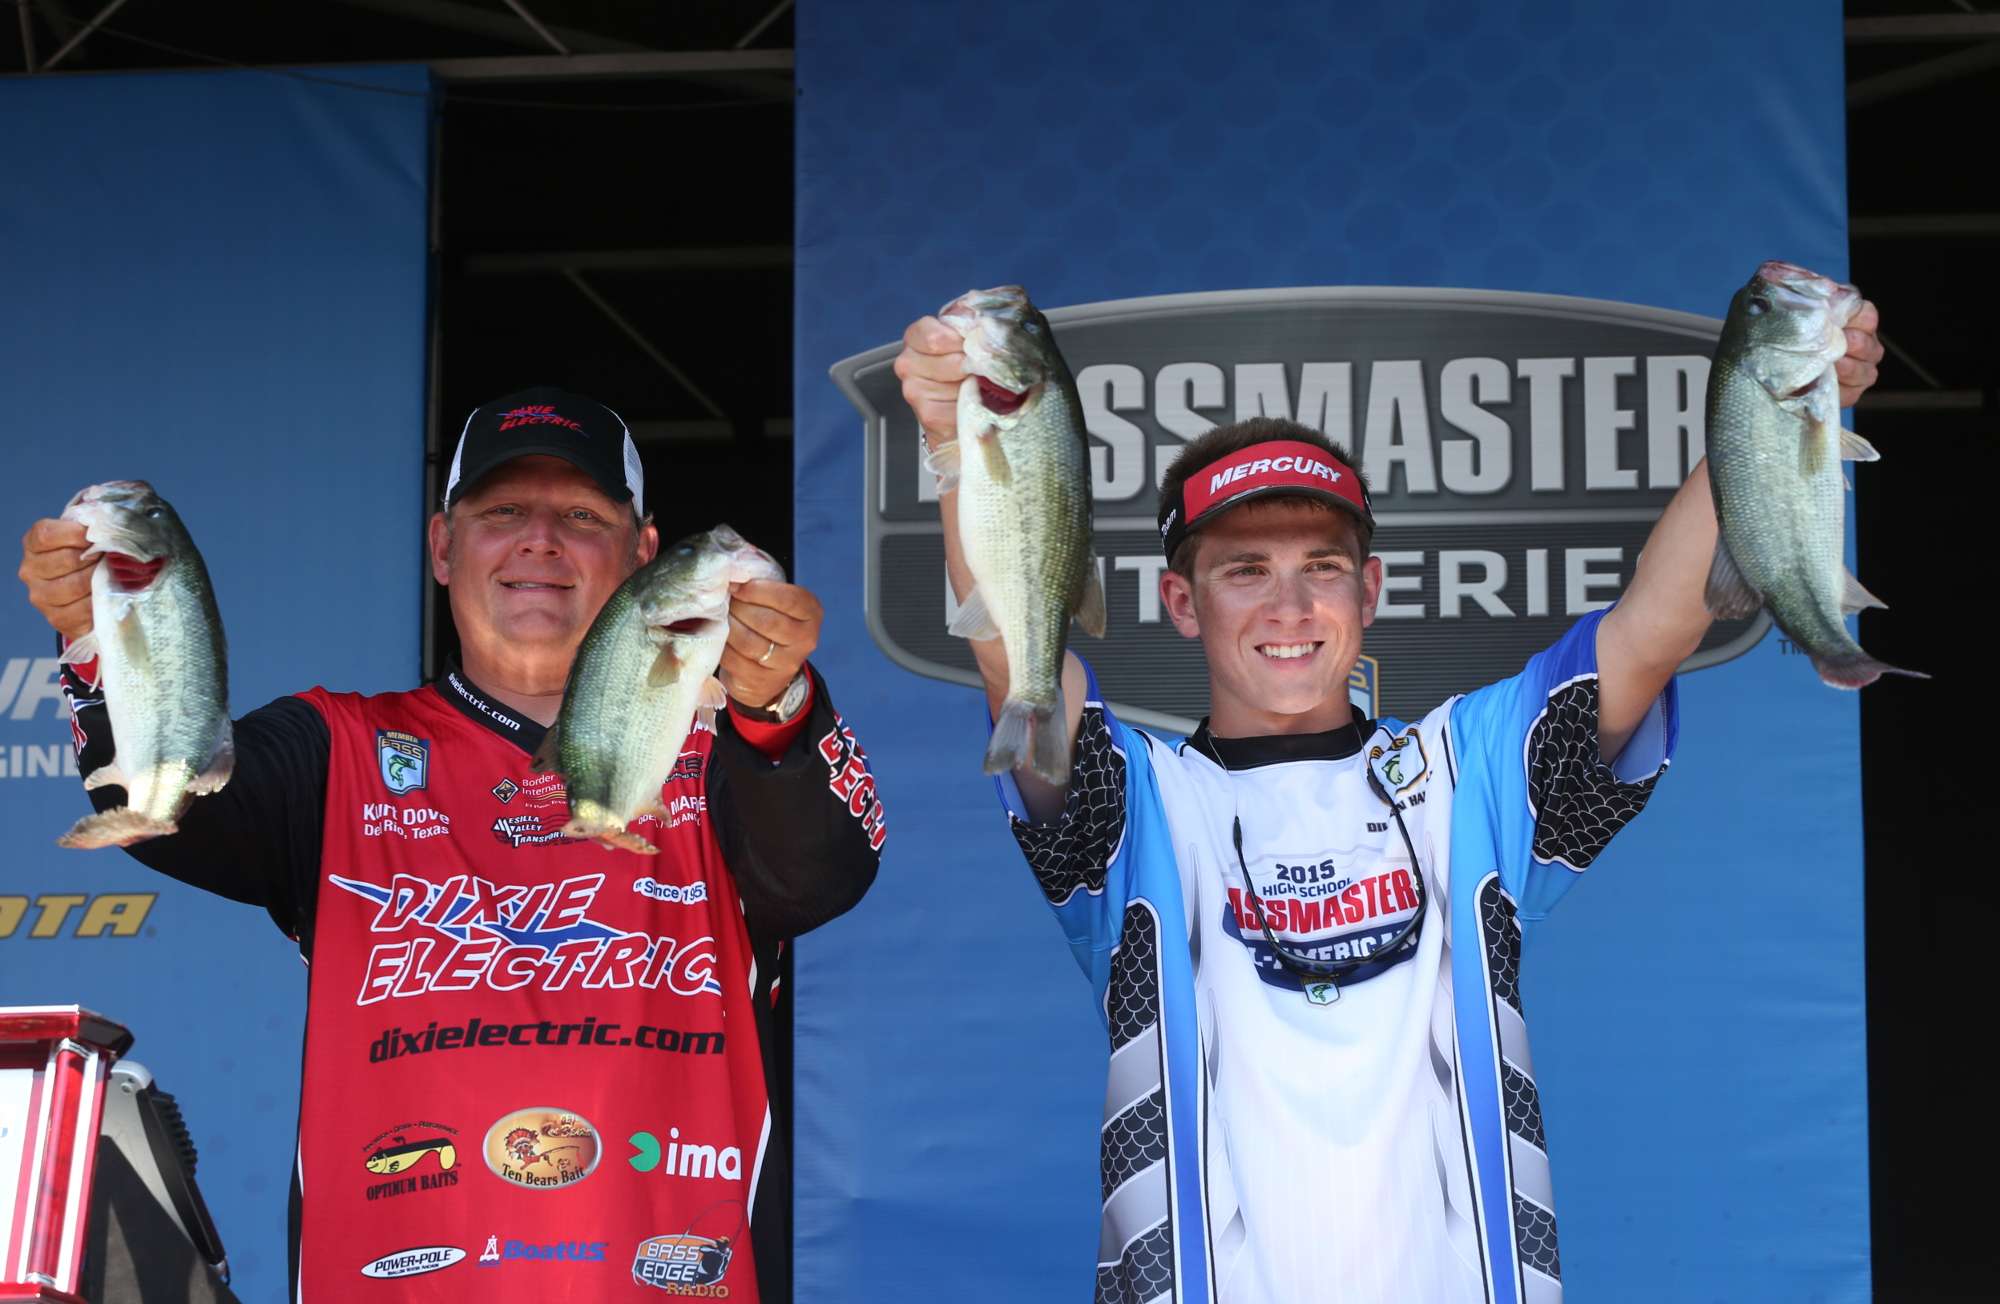 Kurt Dove and Dillon Harrell came out swinging with 11-9. A good day, but not enough to eclipse the leaders.